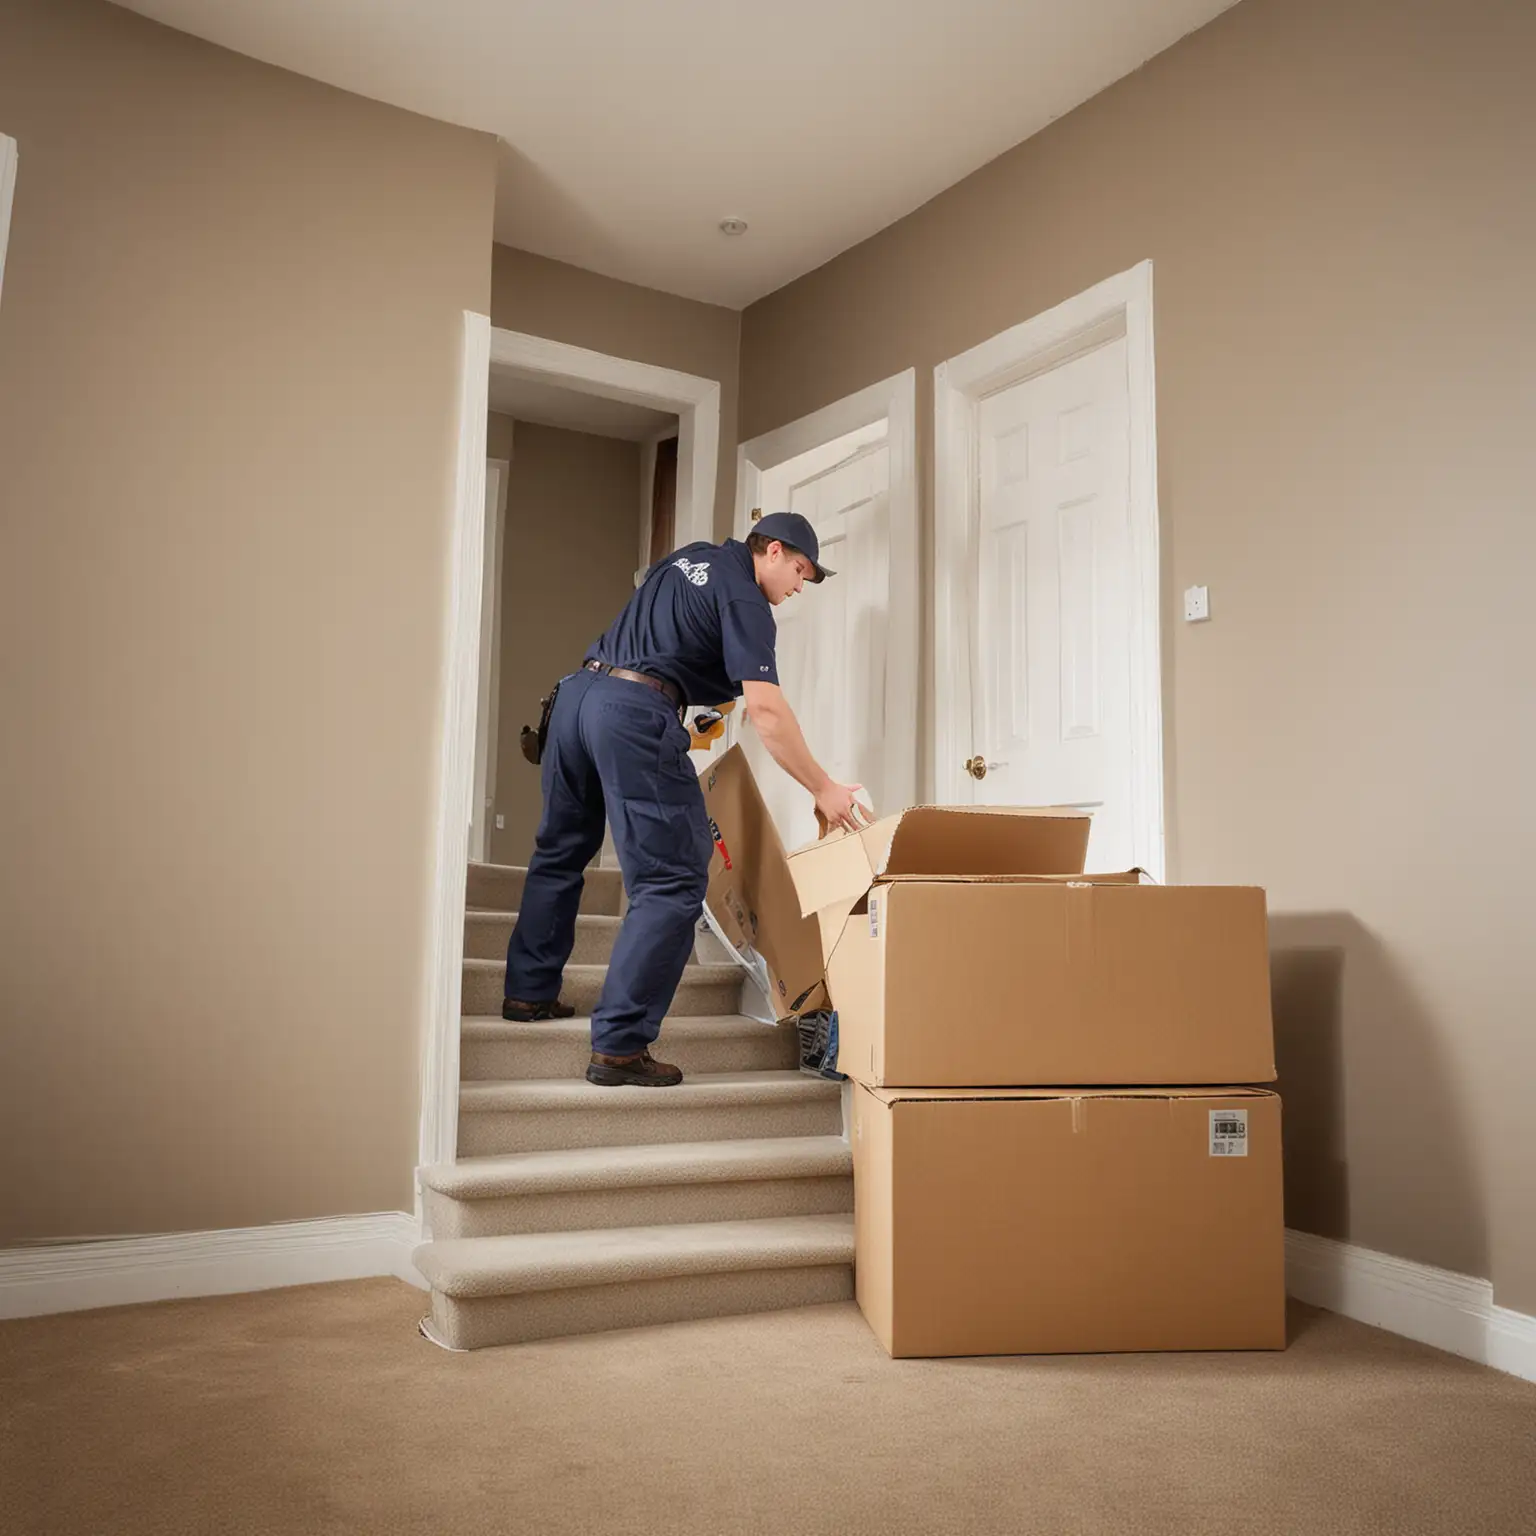 Create a high-quality photograph depicting a single item removal scenario by a professional junk removal team. The image should feature a team member in a branded uniform, lifting or moving a large, bulky item such as a refrigerator, sofa, or old television out of a residential home or apartment. The setting shows the worker navigating through a doorway or down a flight of stairs, highlighting the care and skill required to handle large items safely. The scene conveys a sense of personal service and attention to detail, emphasizing the convenience offered by the company. Use a DSLR camera with an 85mm lens for a more intimate and detailed capture of the action, focusing on the interaction between the worker and the item being removed.